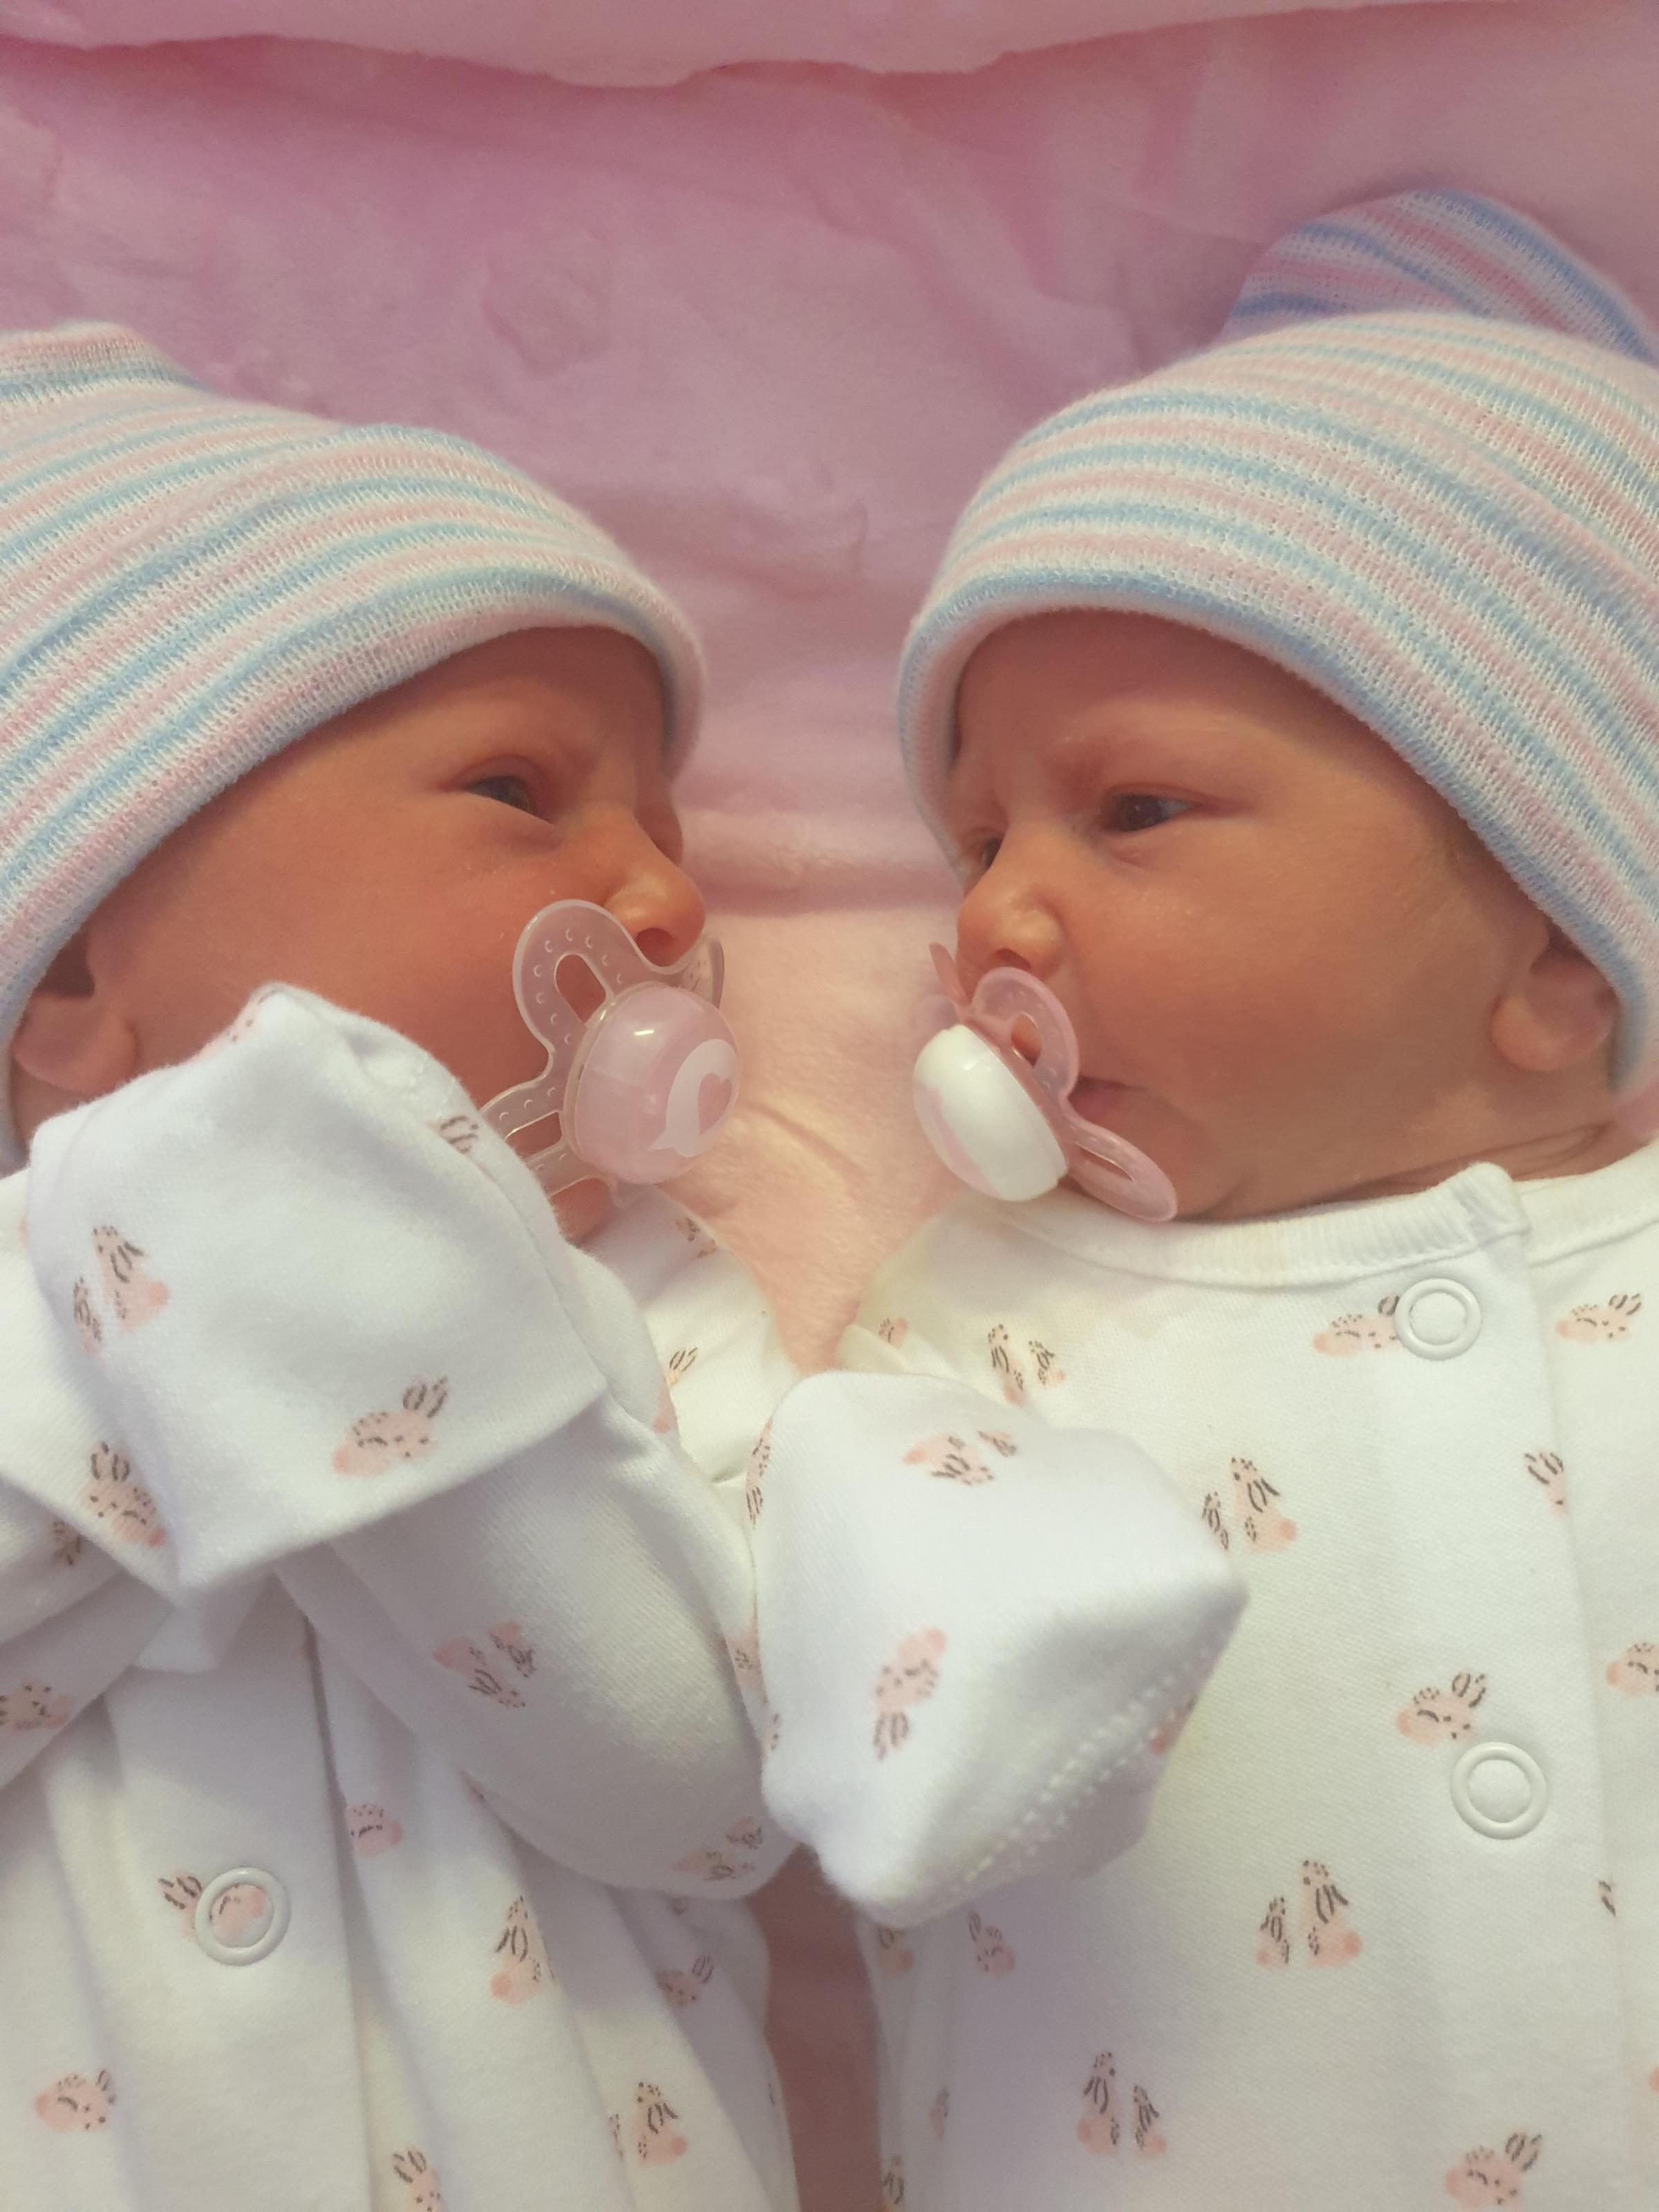 Warrington Guardian: Mia and Evie Doherty, born May 29, weighing 5lb 8oz and 5lb 6oz from Padgate